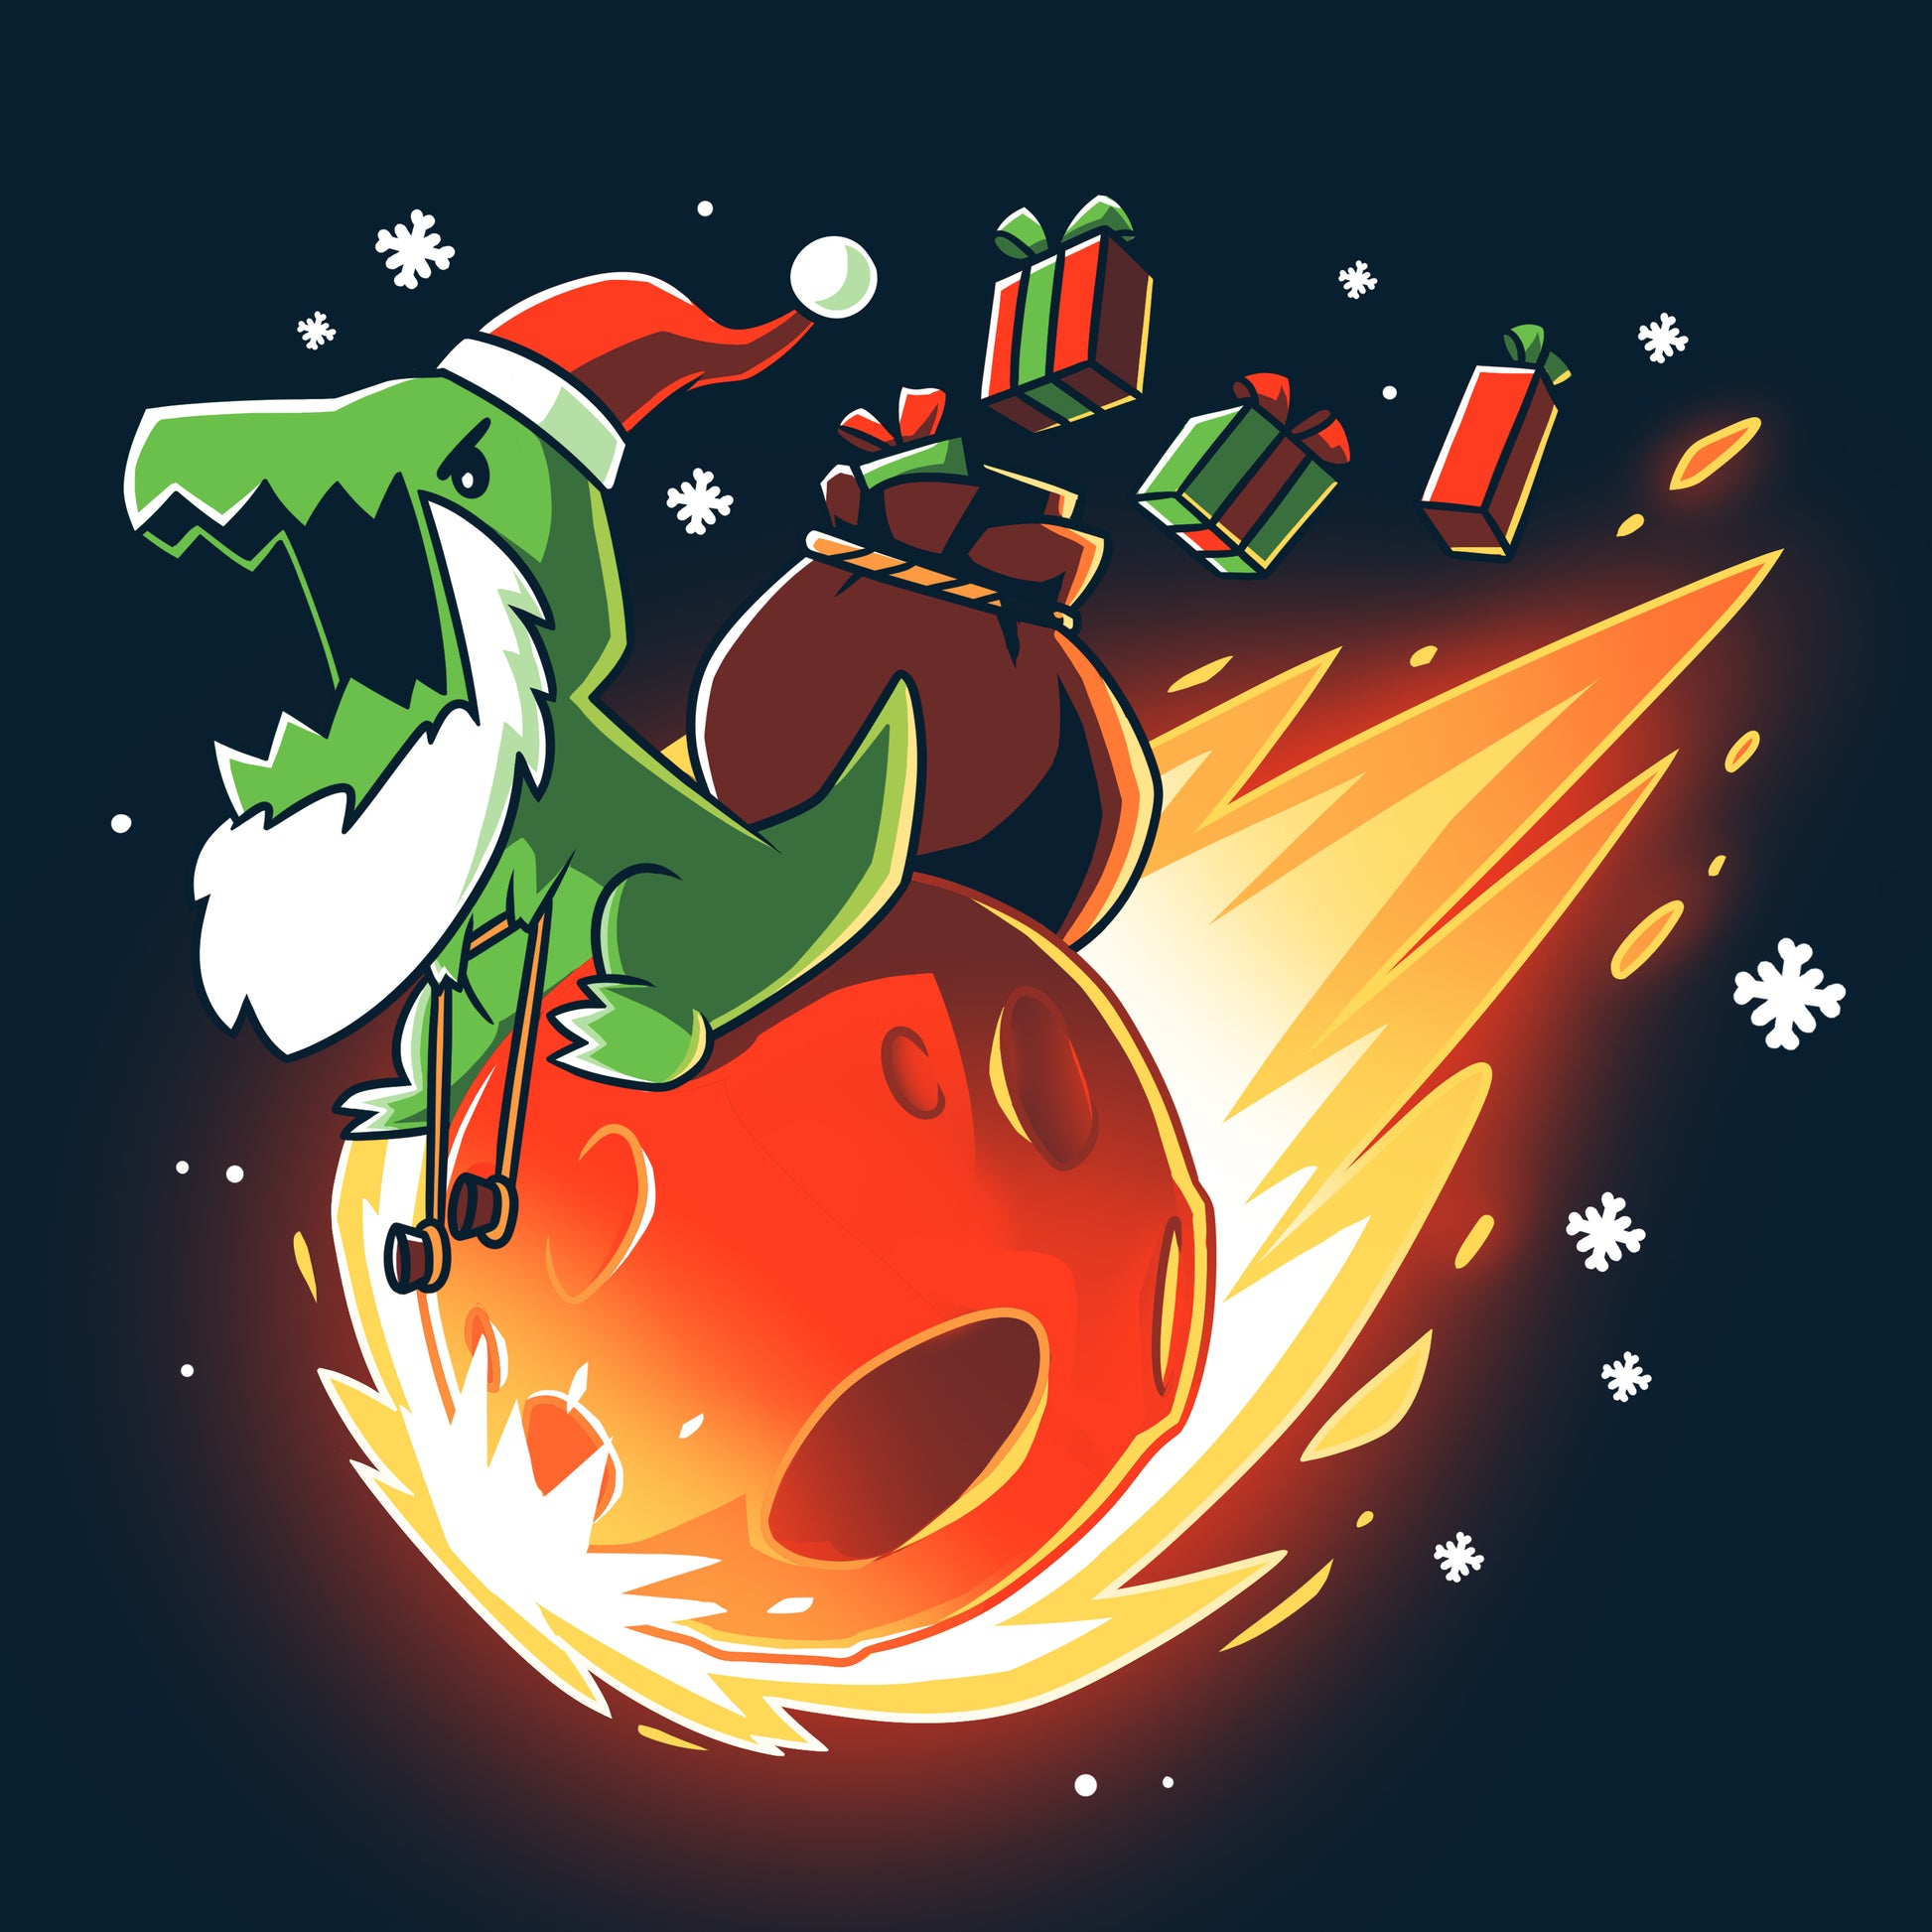 Get ready for an explosive TeeTurtle X-Mas Rex sighting! This design features Santa Rex riding a dinosaur rocket, making it the perfect t-shirt for anyone who loves a unique holiday twist.